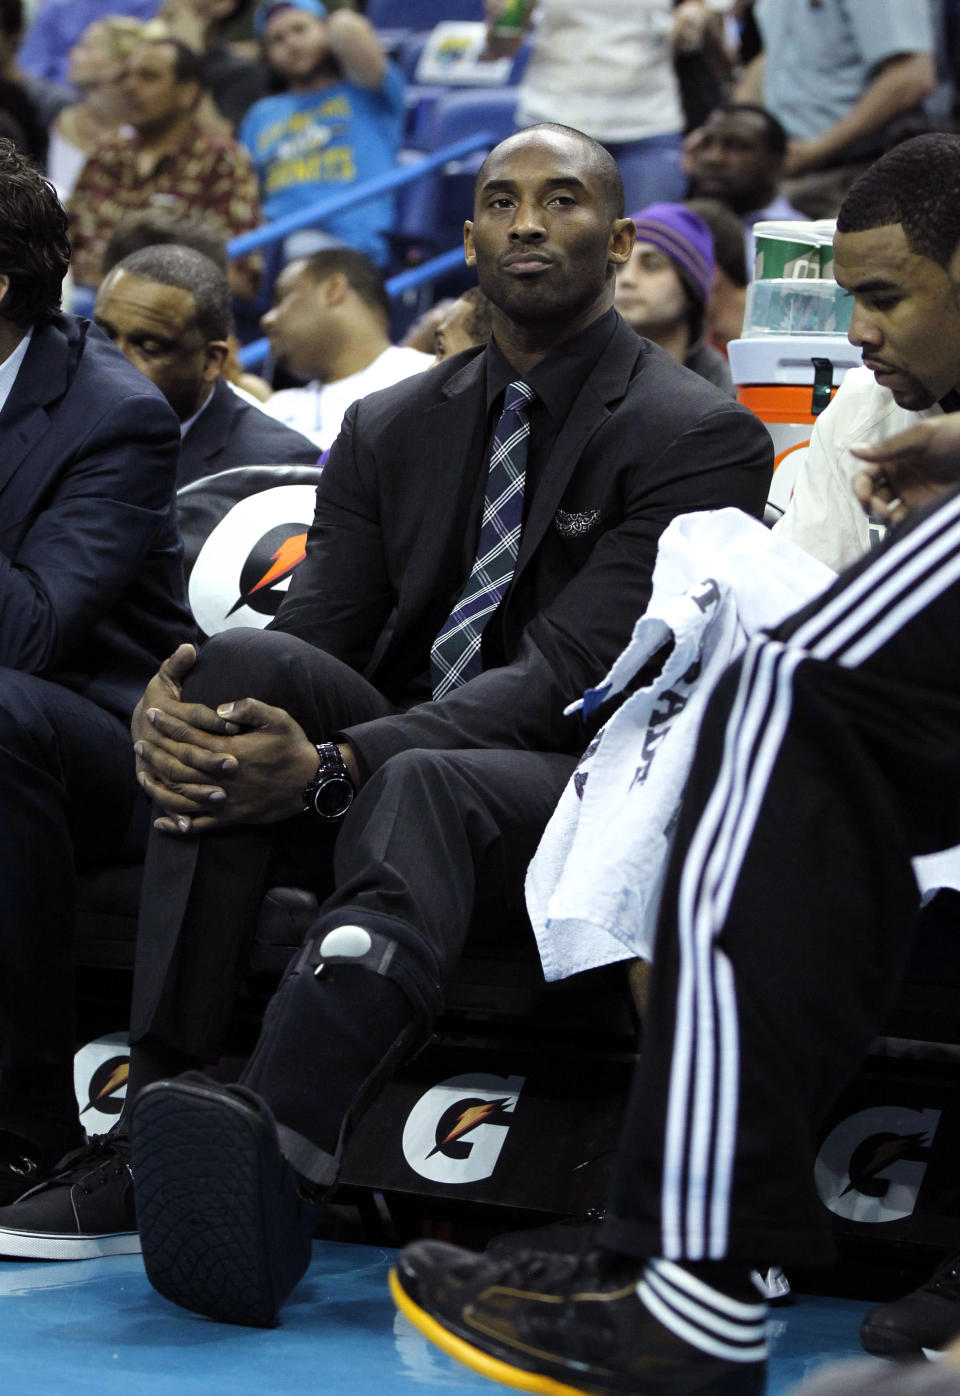 Los Angeles Lakers shooting guard Kobe Bryant watches from the bench with a cast on his foot in the first half of an NBA basketball game against the New Orleans Hornets in New Orleans, Monday, April 9, 2012. (AP Photo/Gerald Herbert)